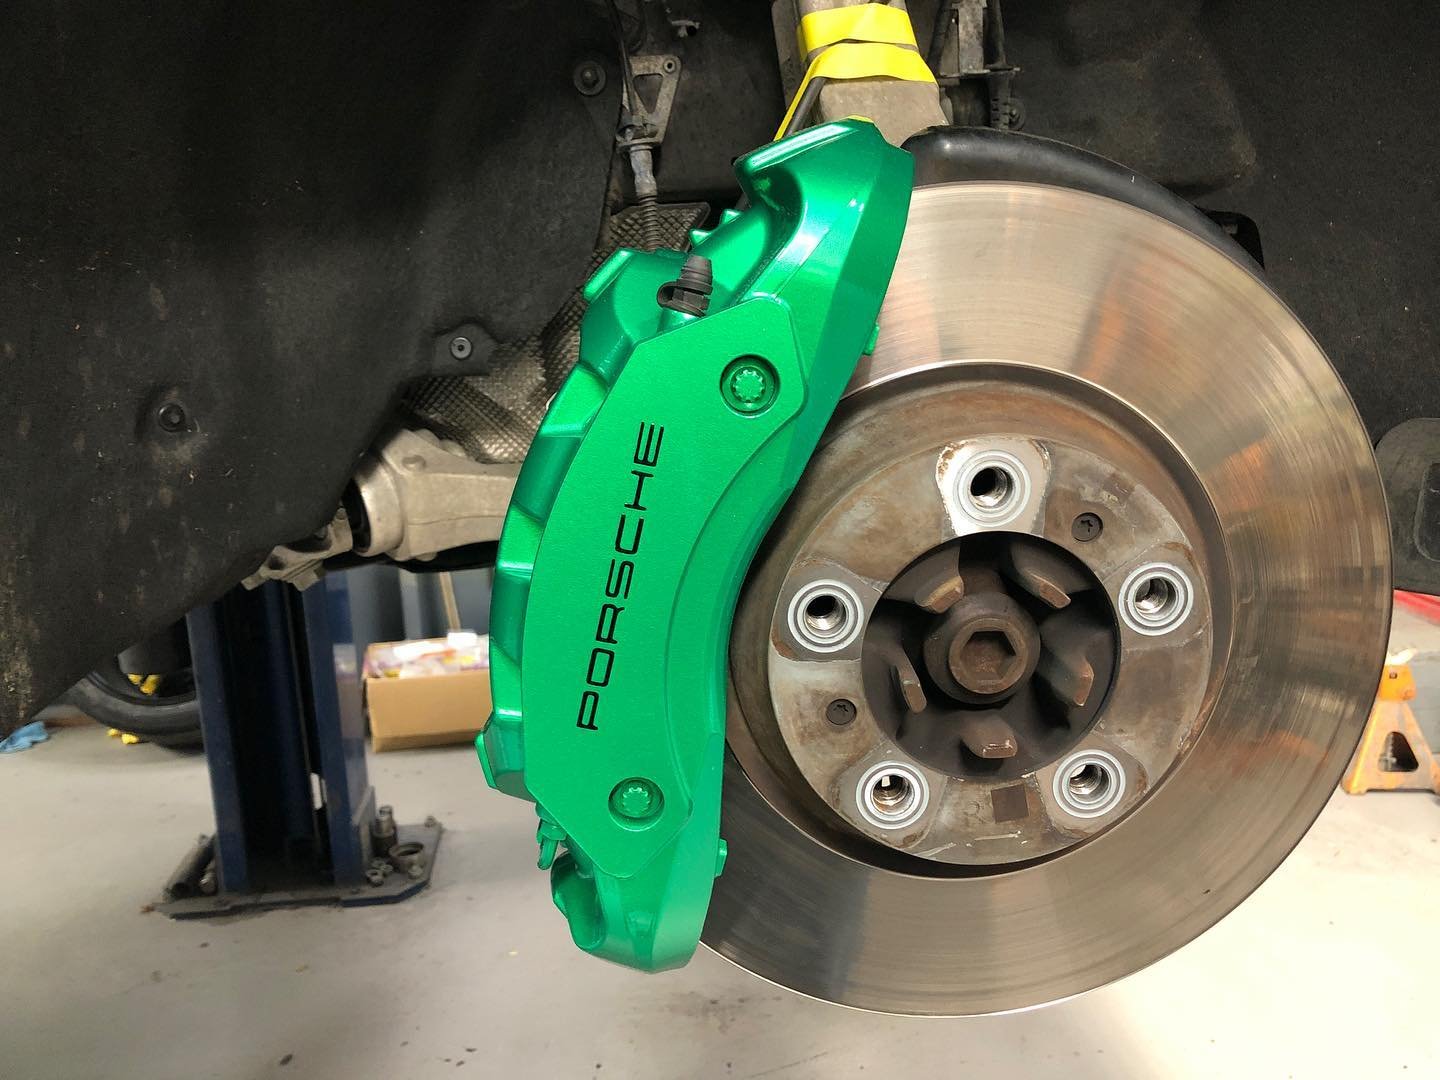 Porsche Calipers Custom &ldquo;Green Peace&rdquo; by @houseofkolor_ Project Duration 2 days. All Calibrations post repair performed in-house. 
#masterautocraft #porsche #custom #houseofkolor #walcomcarbonio